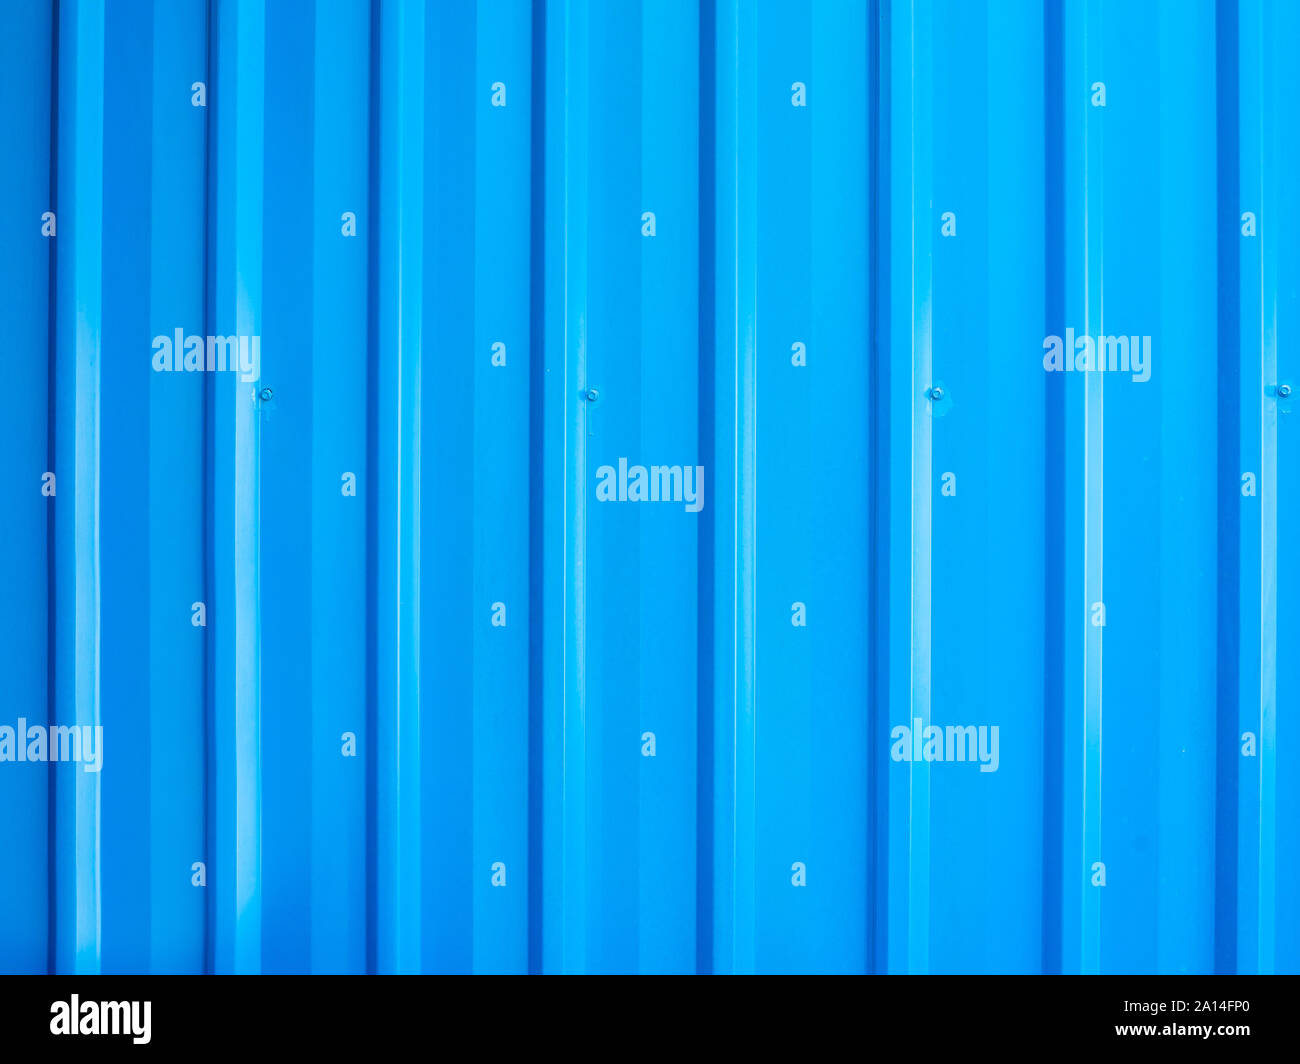 Blue cargo container background. Close-up blue metal pattern texture of container wall background. Stock Photo